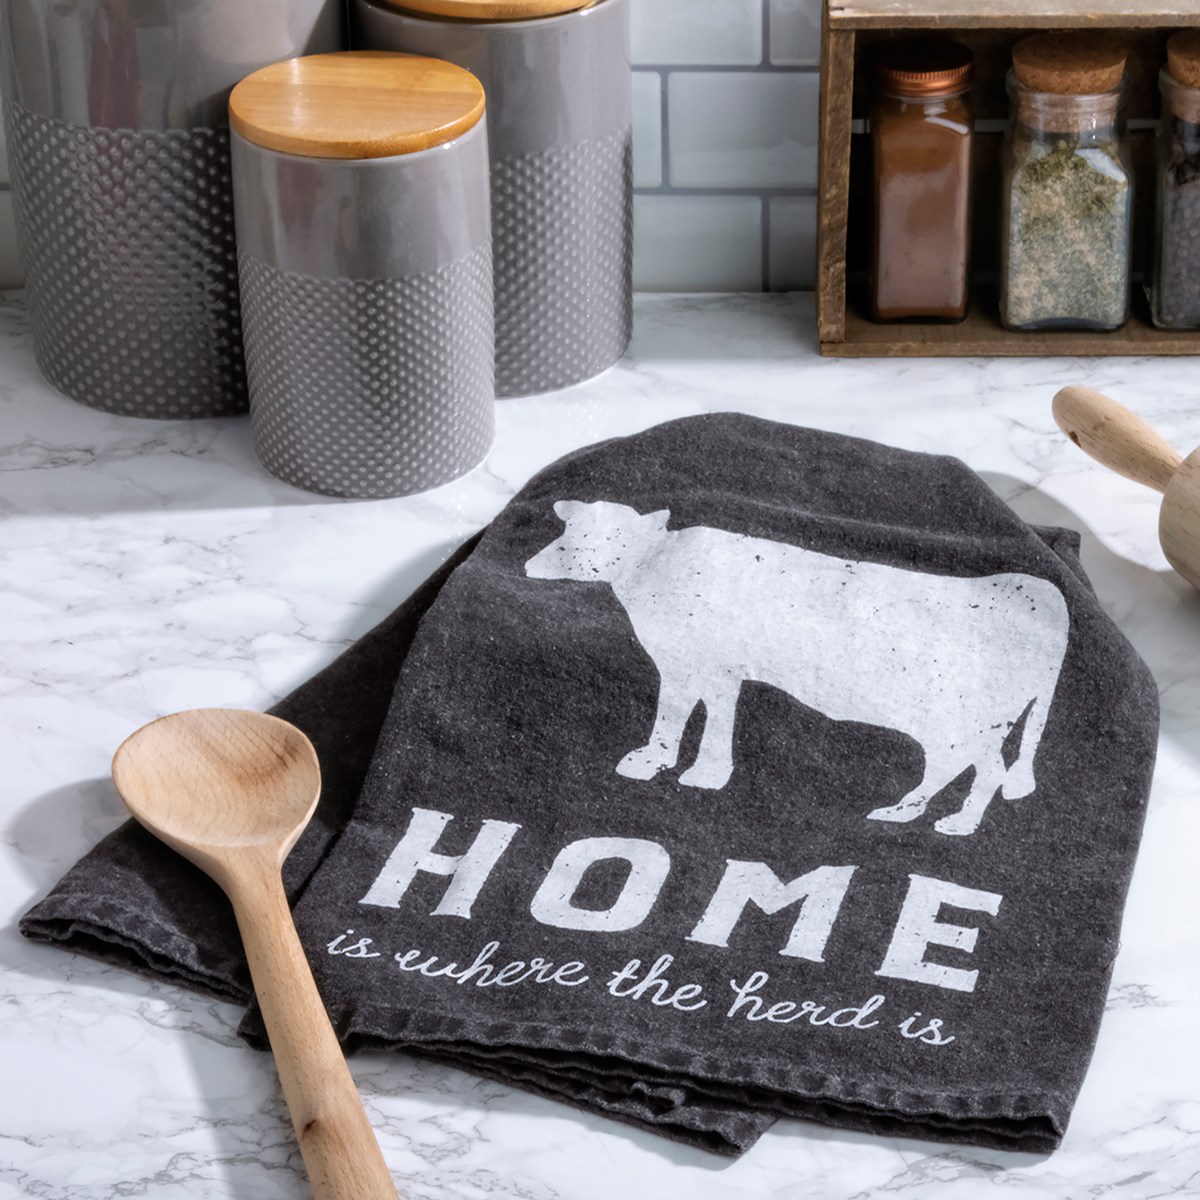 Home Is Where The Herd Is Kitchen Towel - Cotton